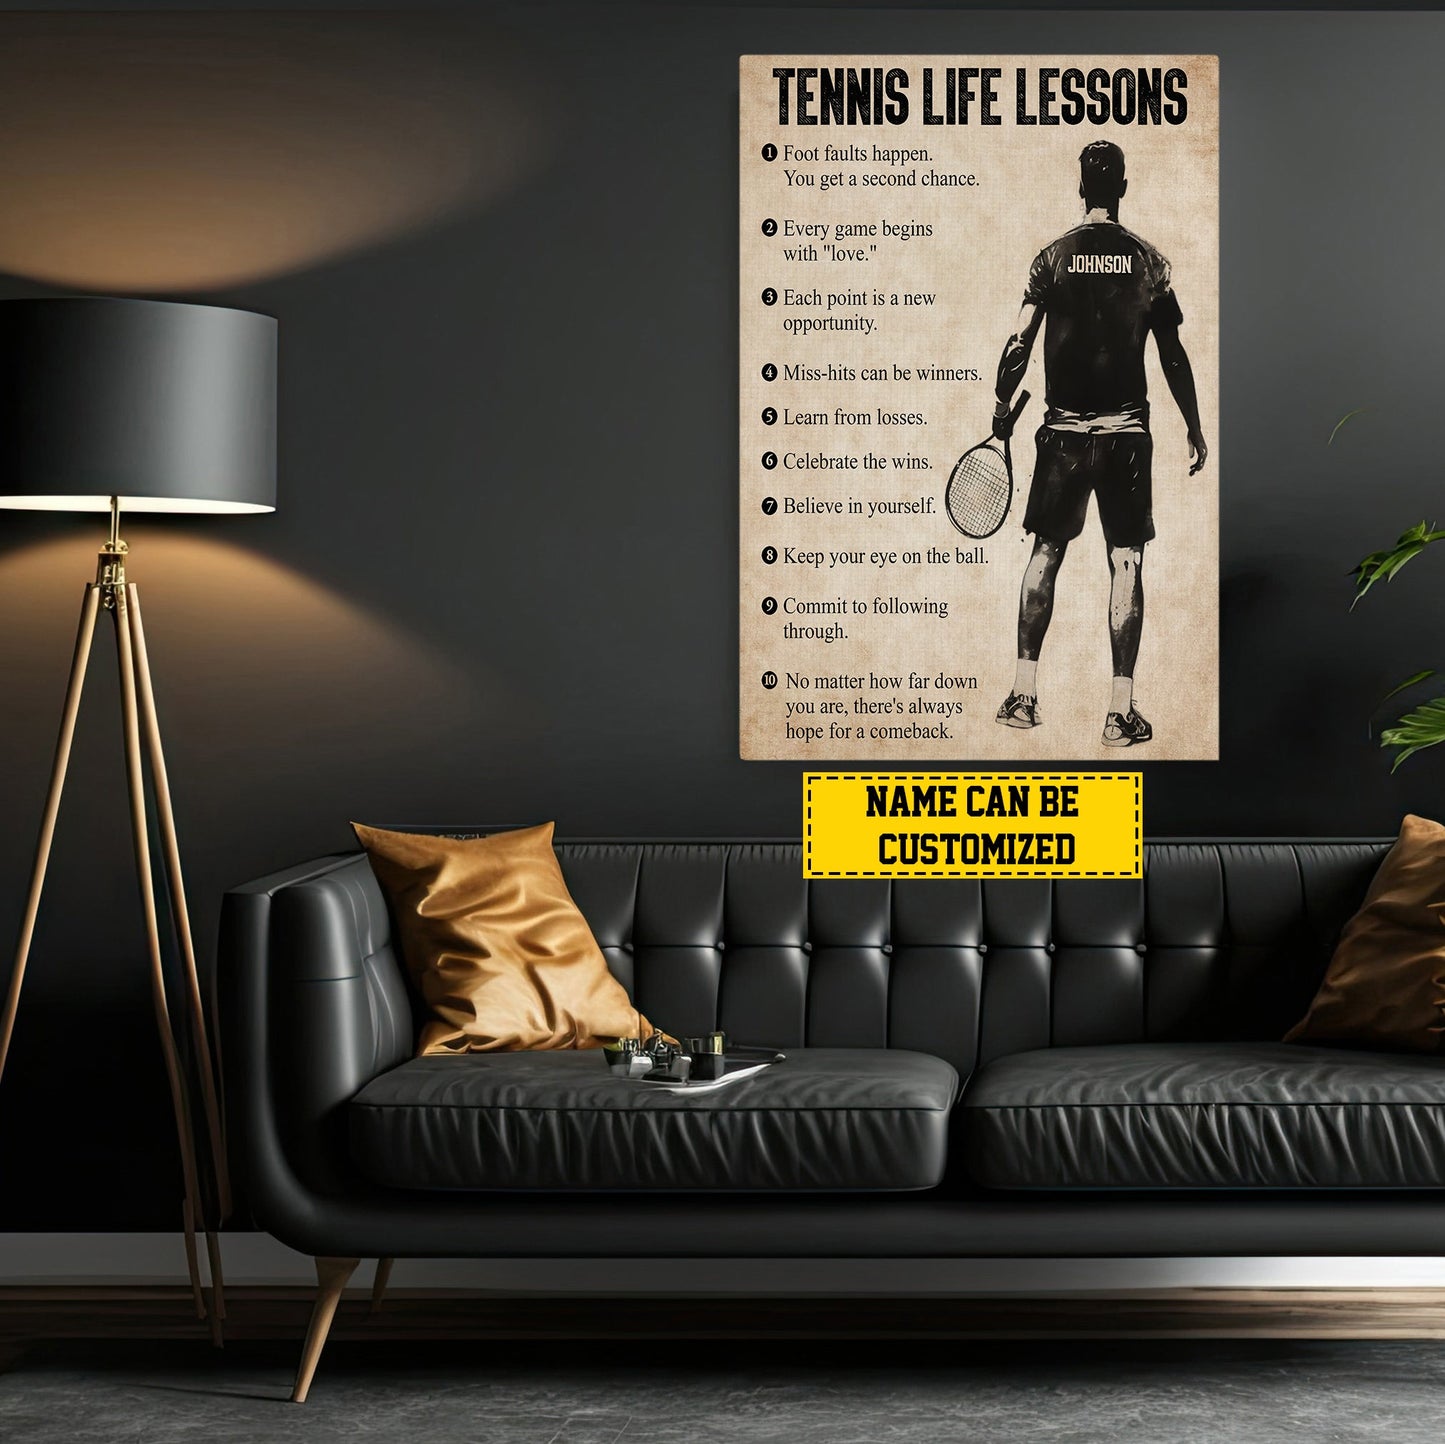 Tennis Life Lessons, Personalized Motivational Tennis Boy Canvas Painting, Inspirational Quotes Wall Art Decor, Poster Gift For Tennis Lovers